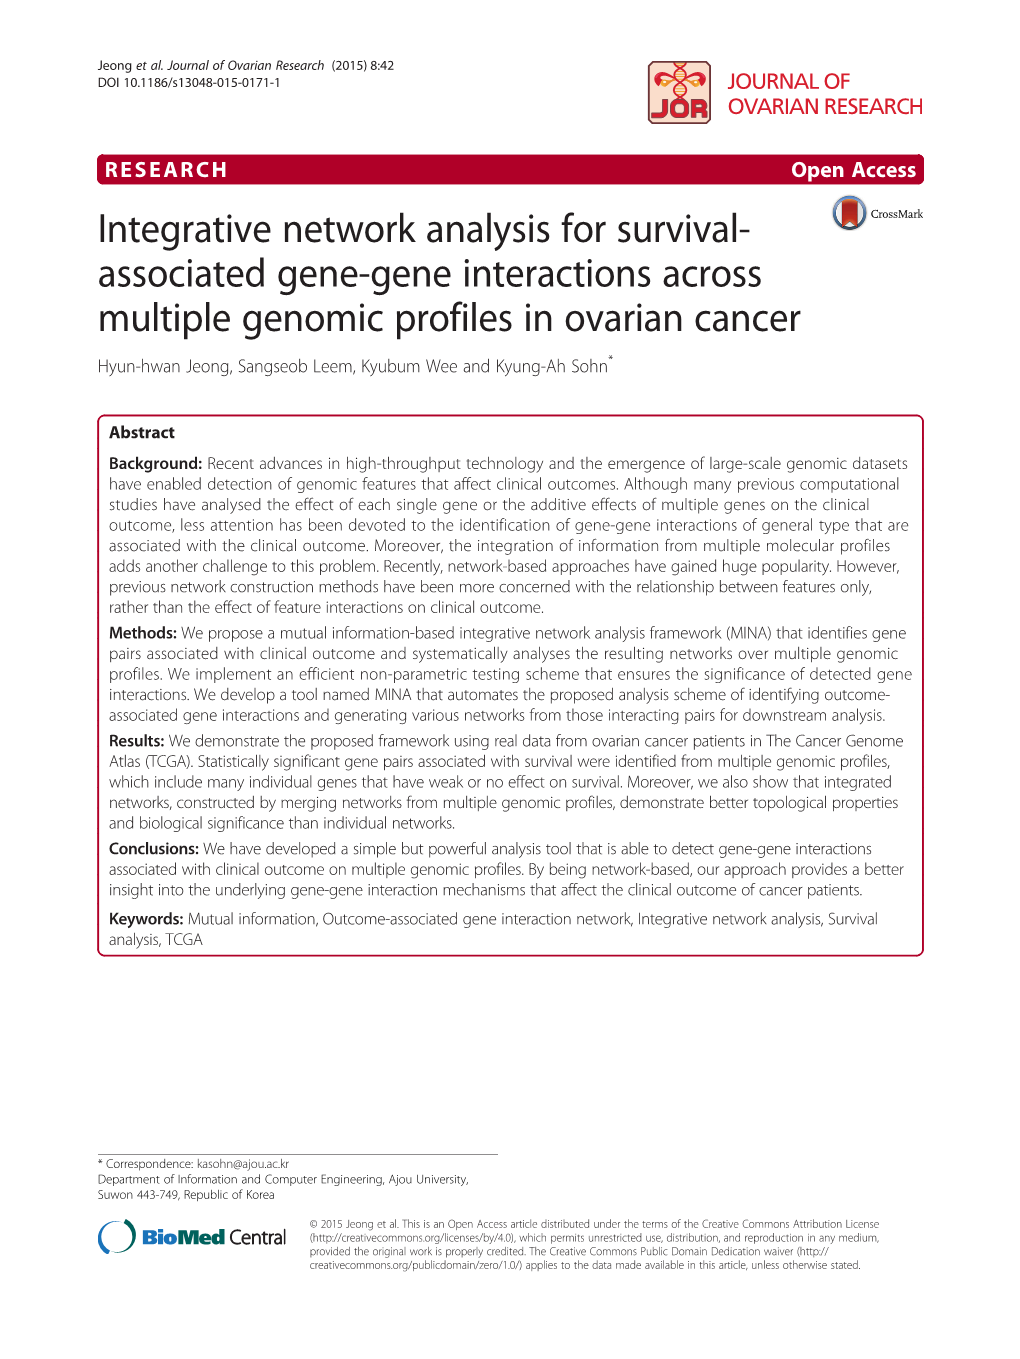 Integrative Network Analysis for Survival-Associated Gene-Gene Interactions Across Multiple Genomic Profiles in Ovarian Cancer